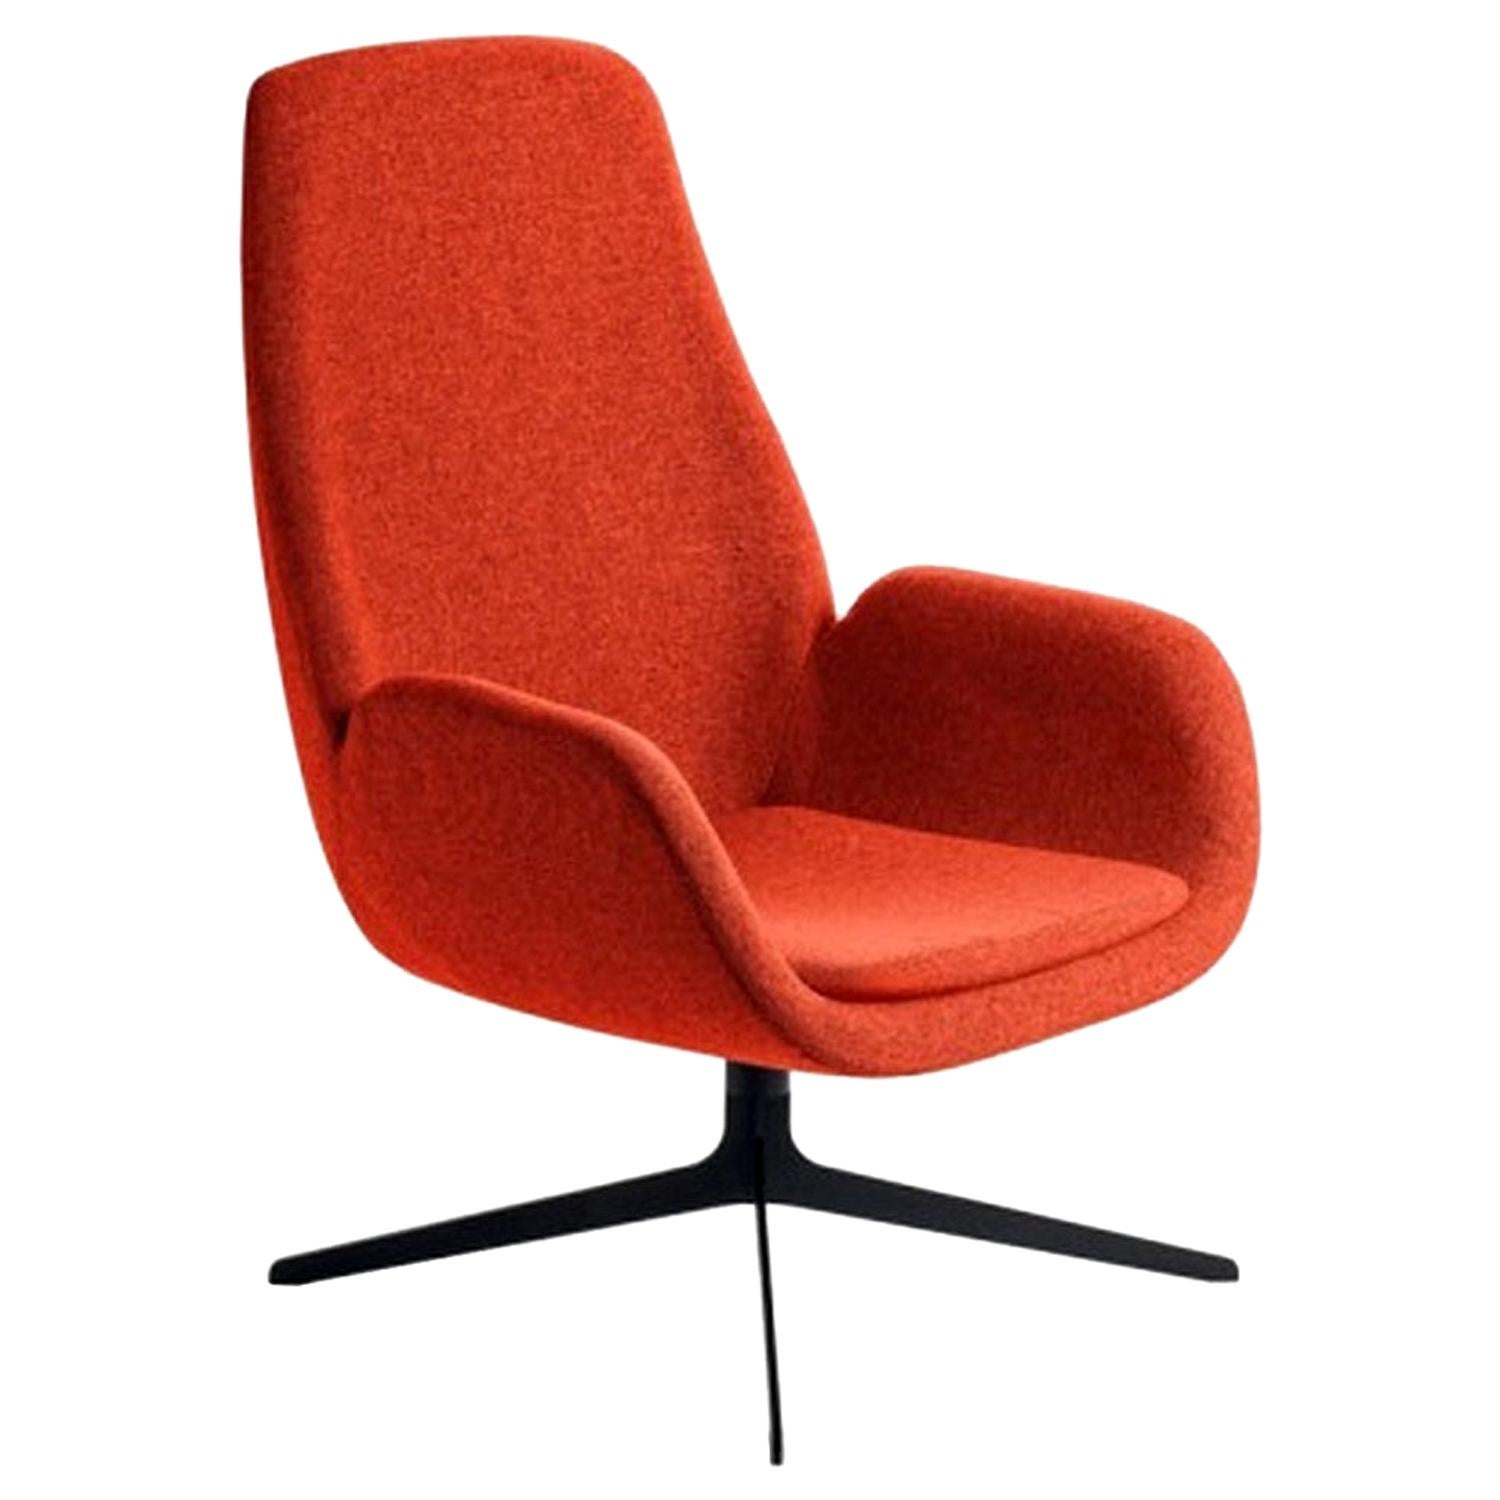 Red Mysa Lounge Chair, Designed by Michael Schmidt, Made in Italy For Sale